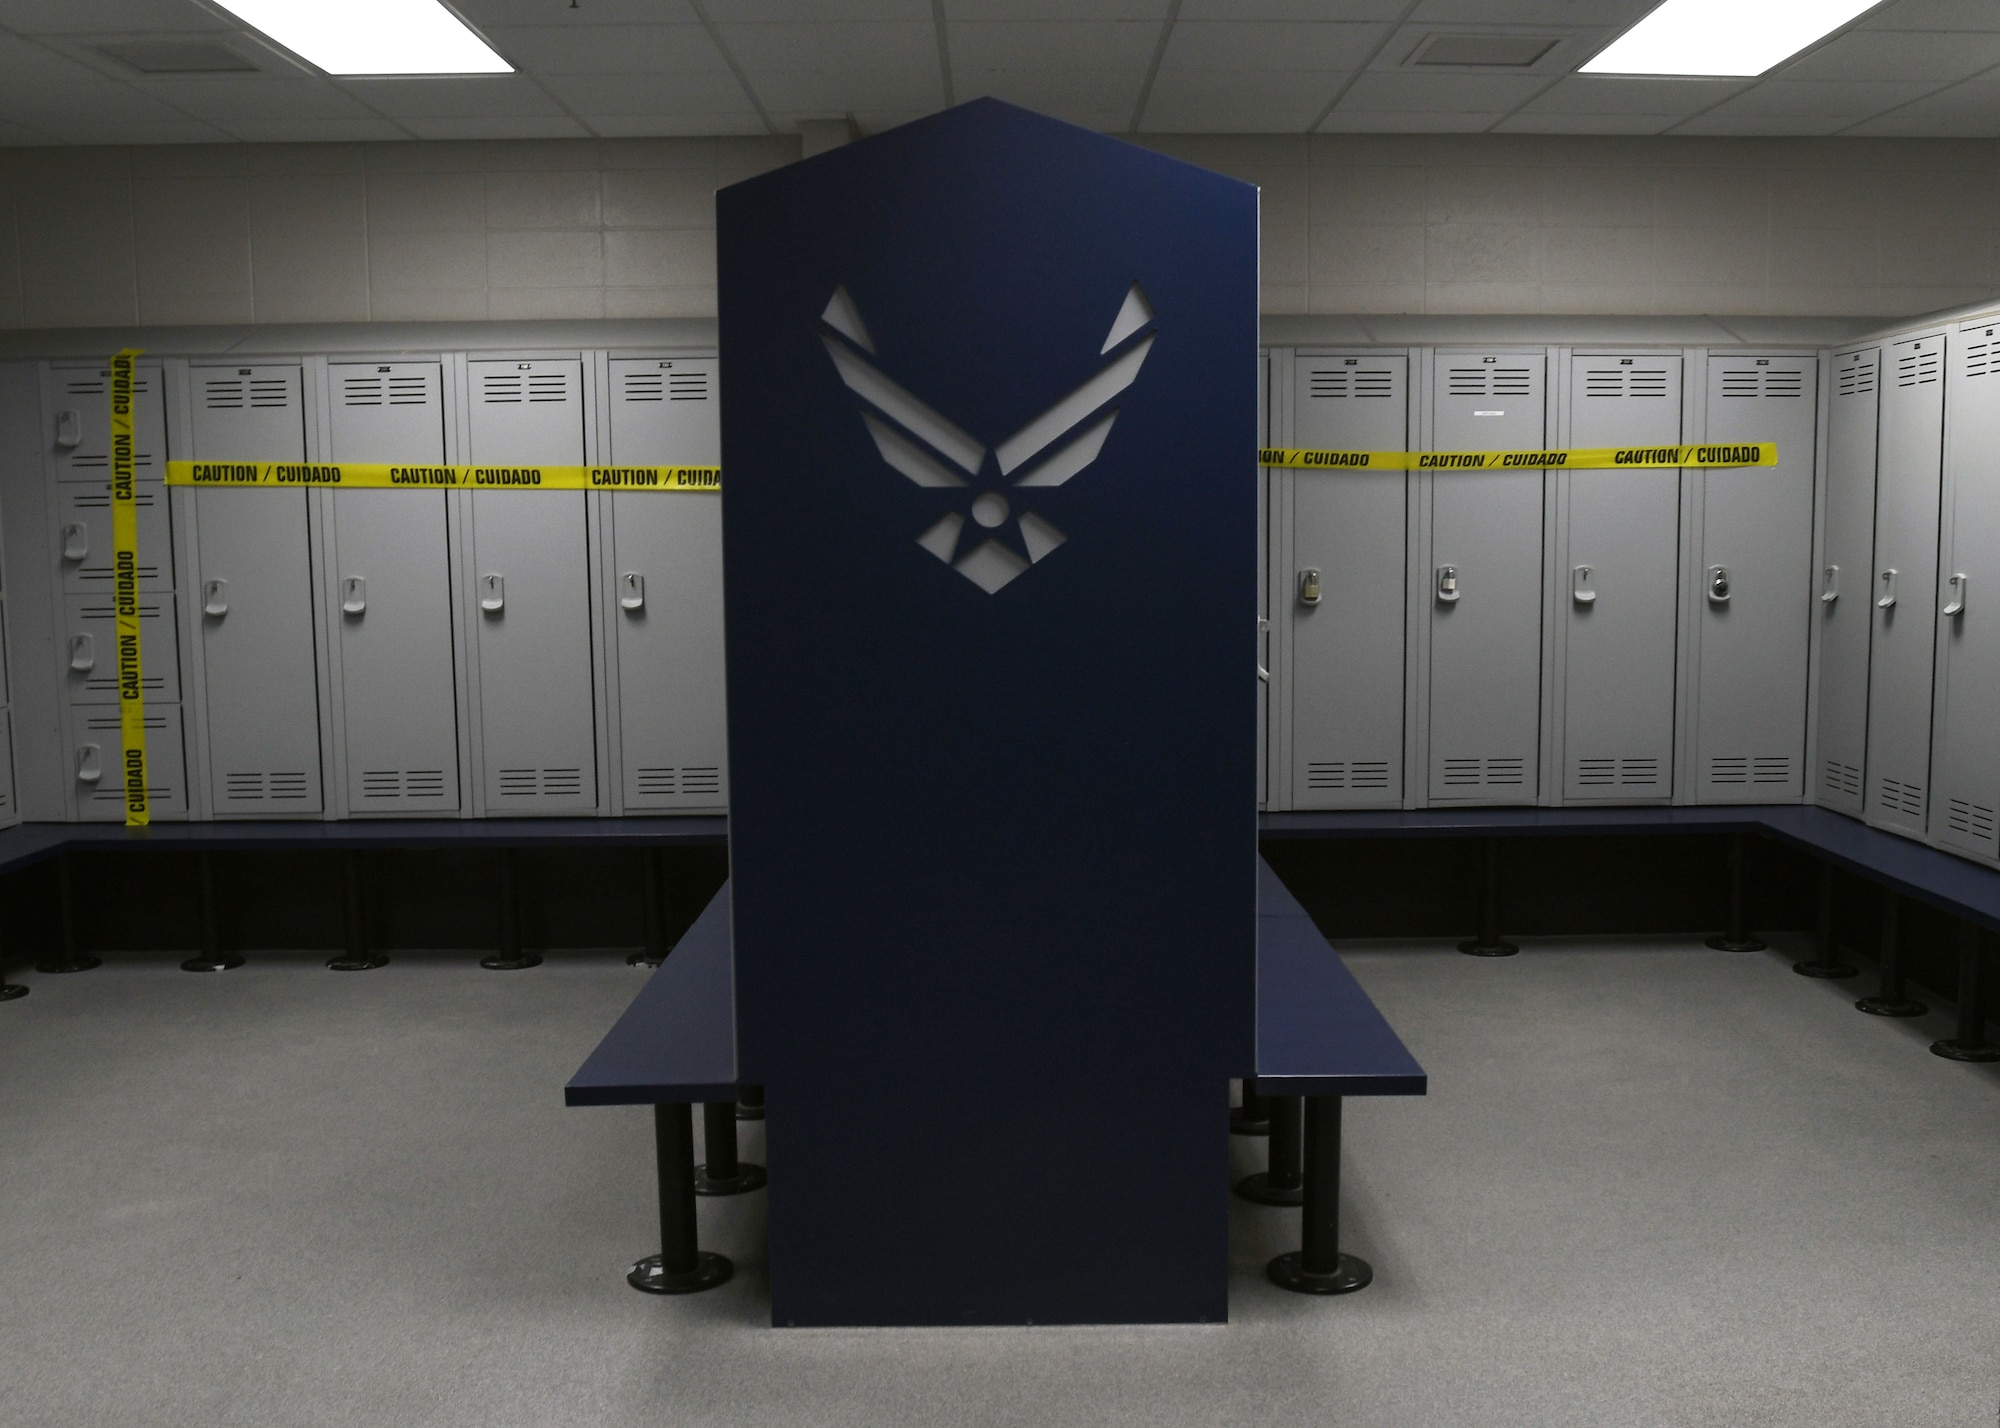 Lockers in the men’s locker room are blocked off to practice social distancing June 19, 2020, at McConnell Air Force Base, Kansas. The locker rooms are available for use for the first time since the start of the pandemic. (U.S. Air Force photo by Tech. Sgt. Jennifer Stai)